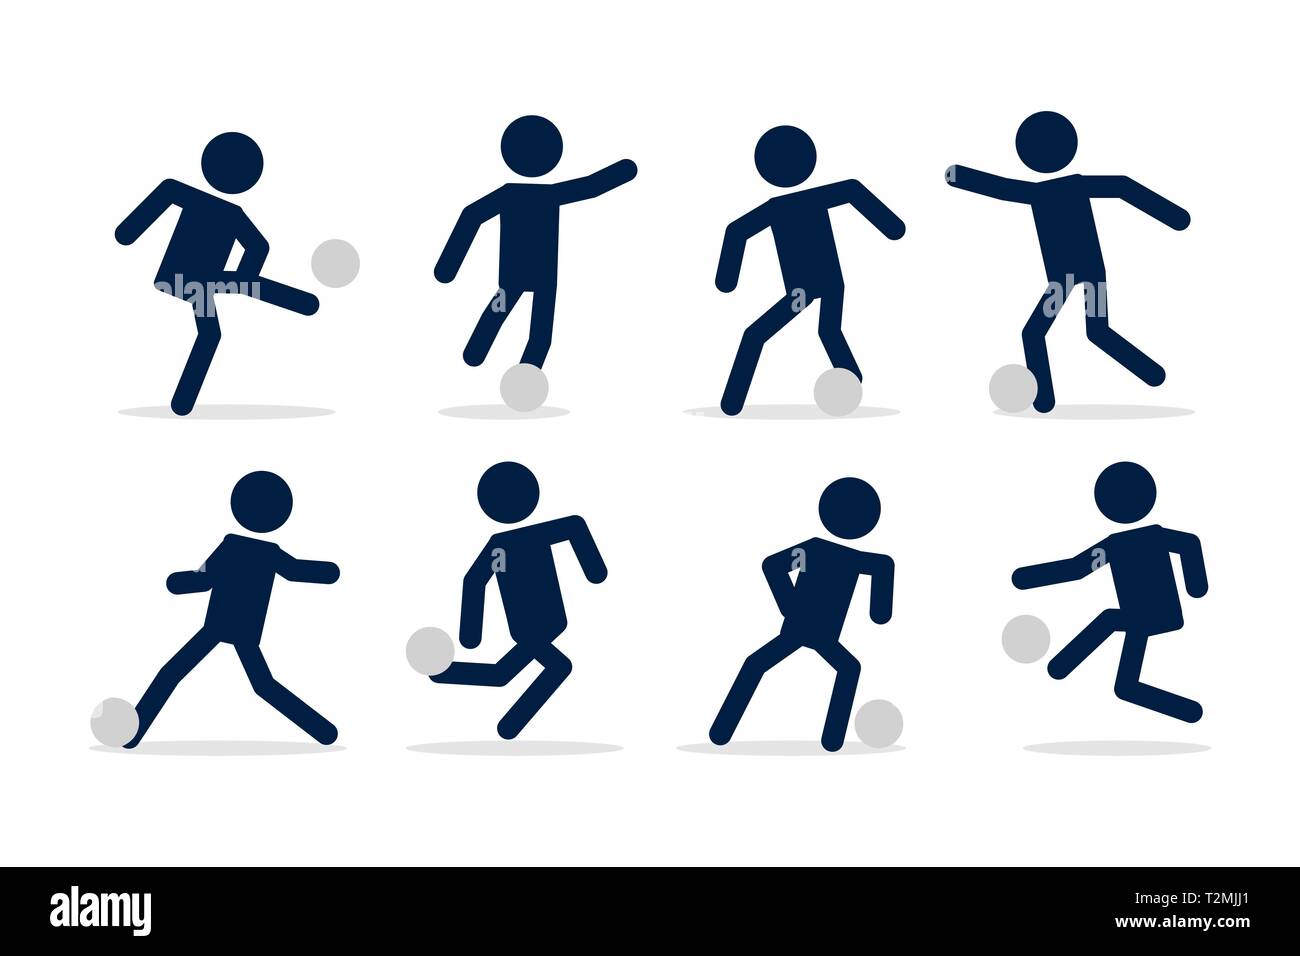 Stick Figures Collection Stock Illustrations – 820 Stick Figures Collection  Stock Illustrations, Vectors & Clipart - Dreamstime